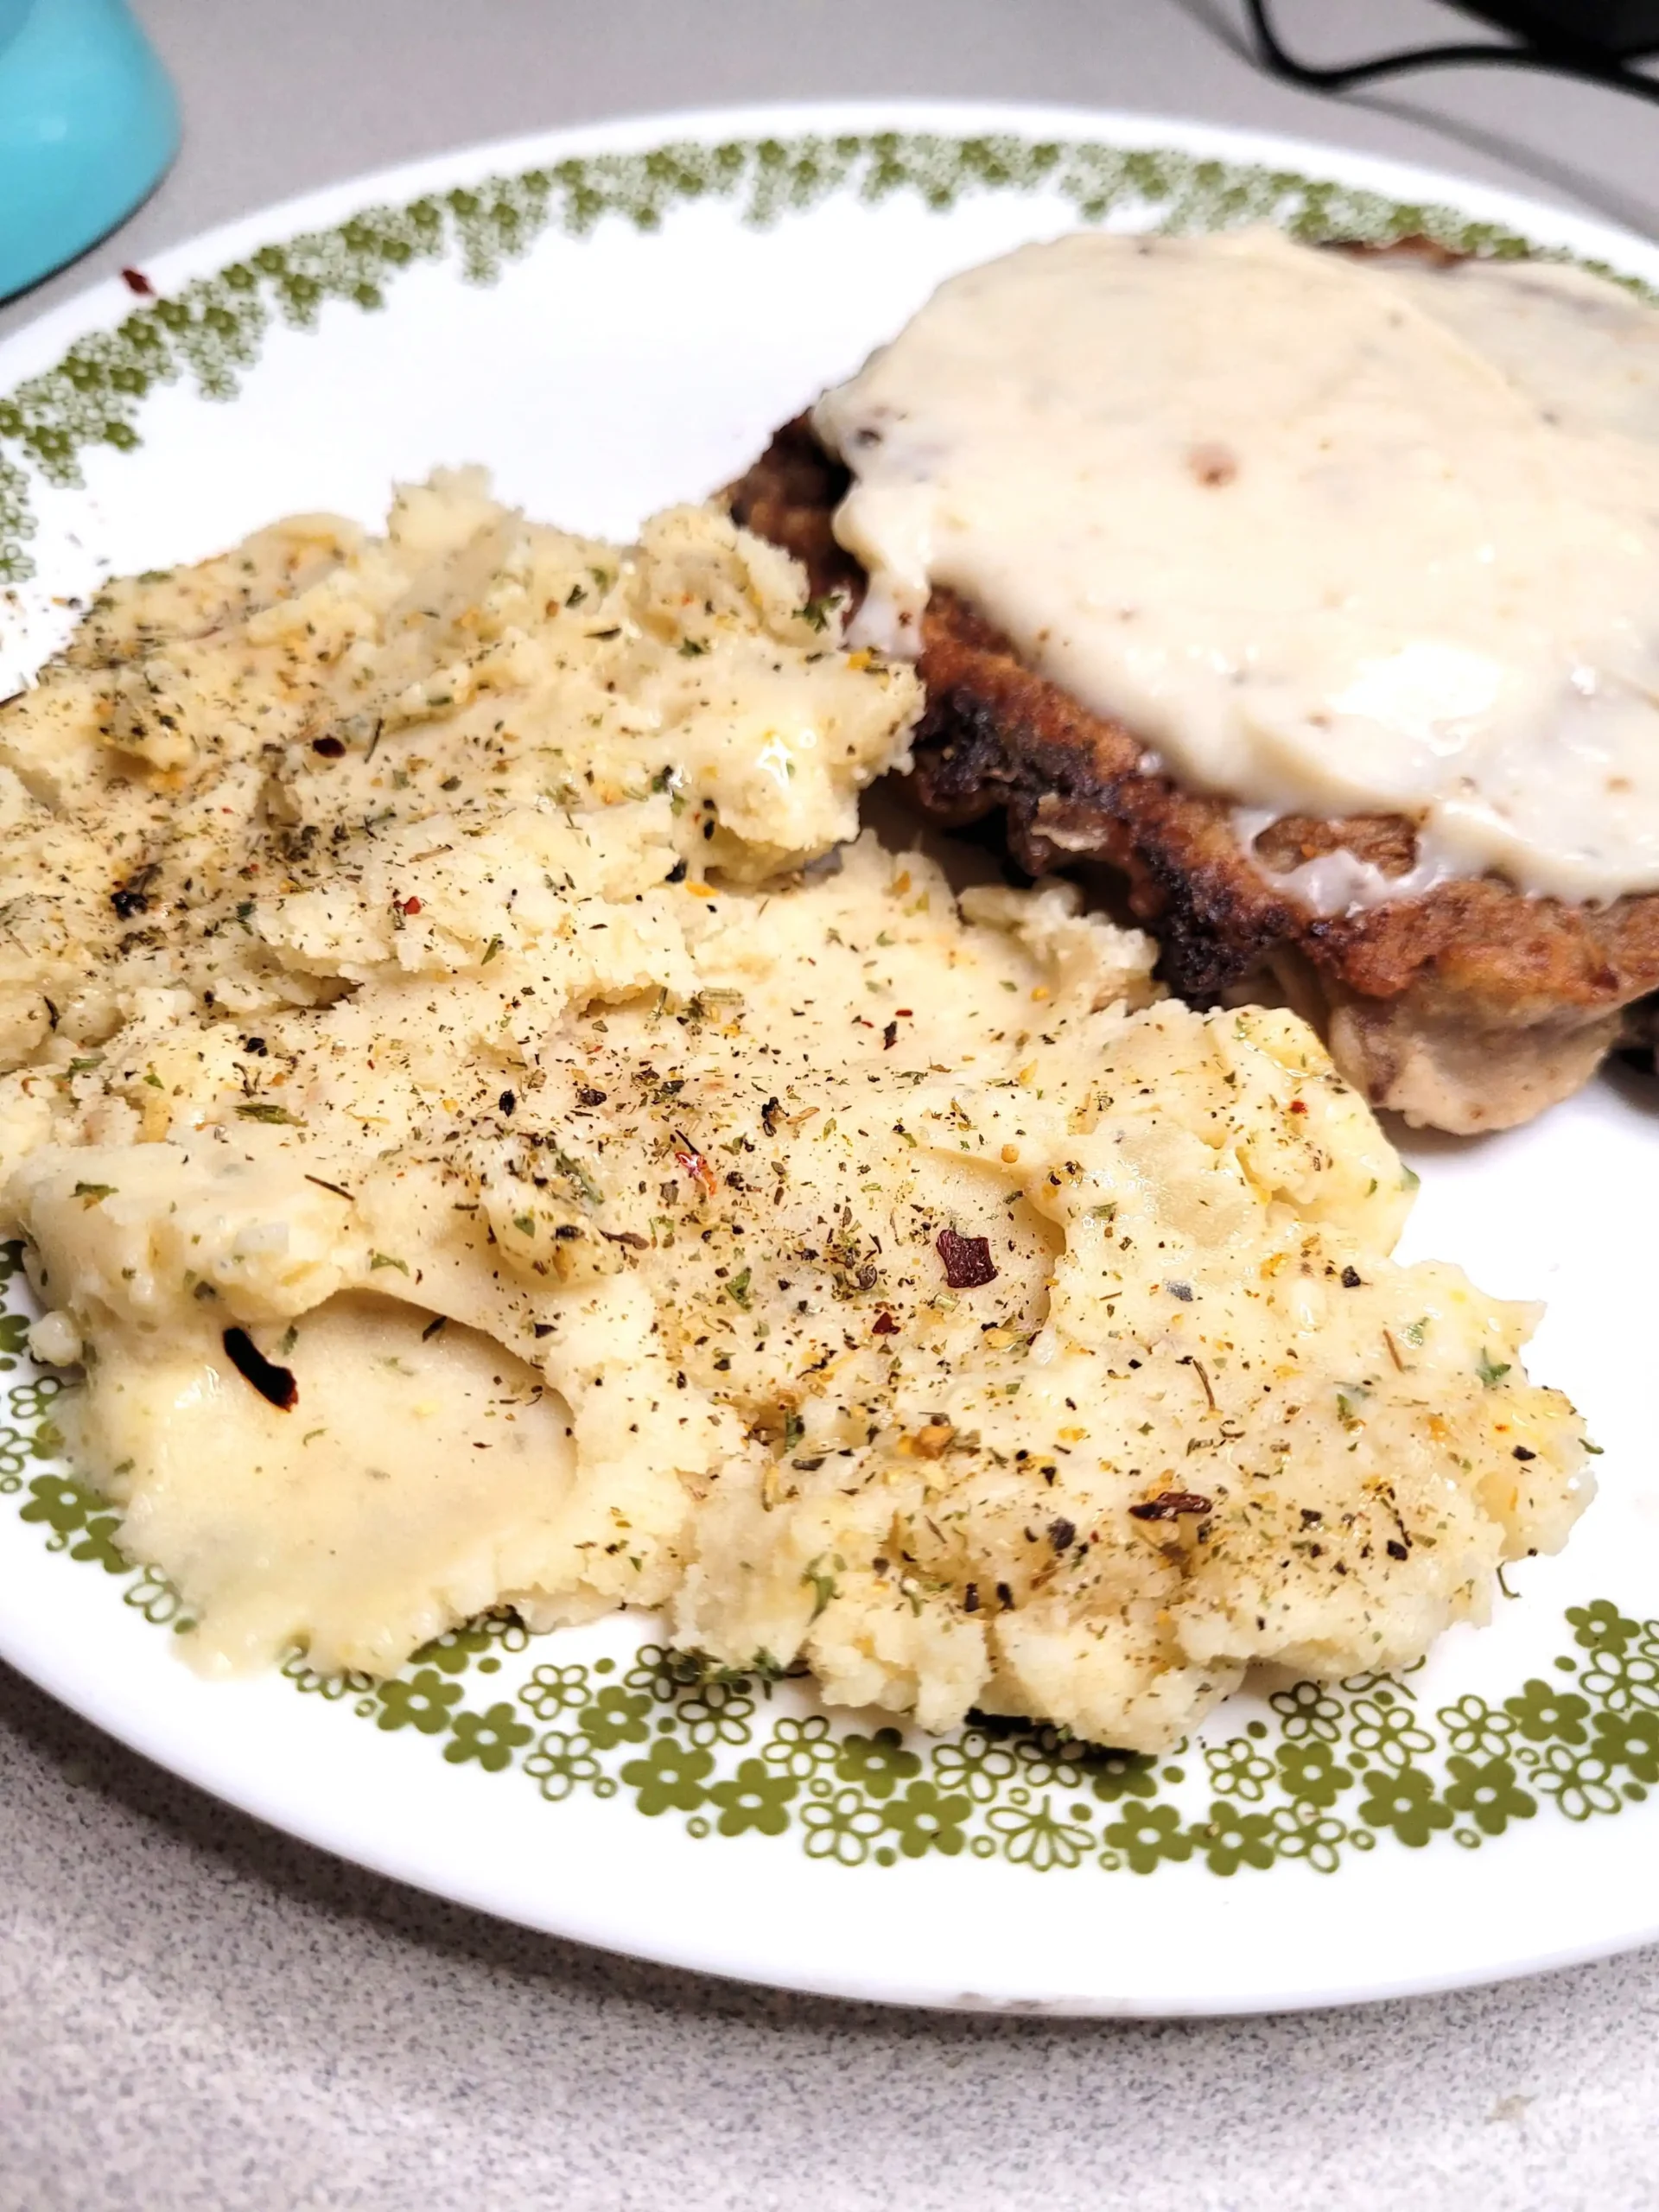 cream cheese mashed potatoes with chicken fried steak in the background.